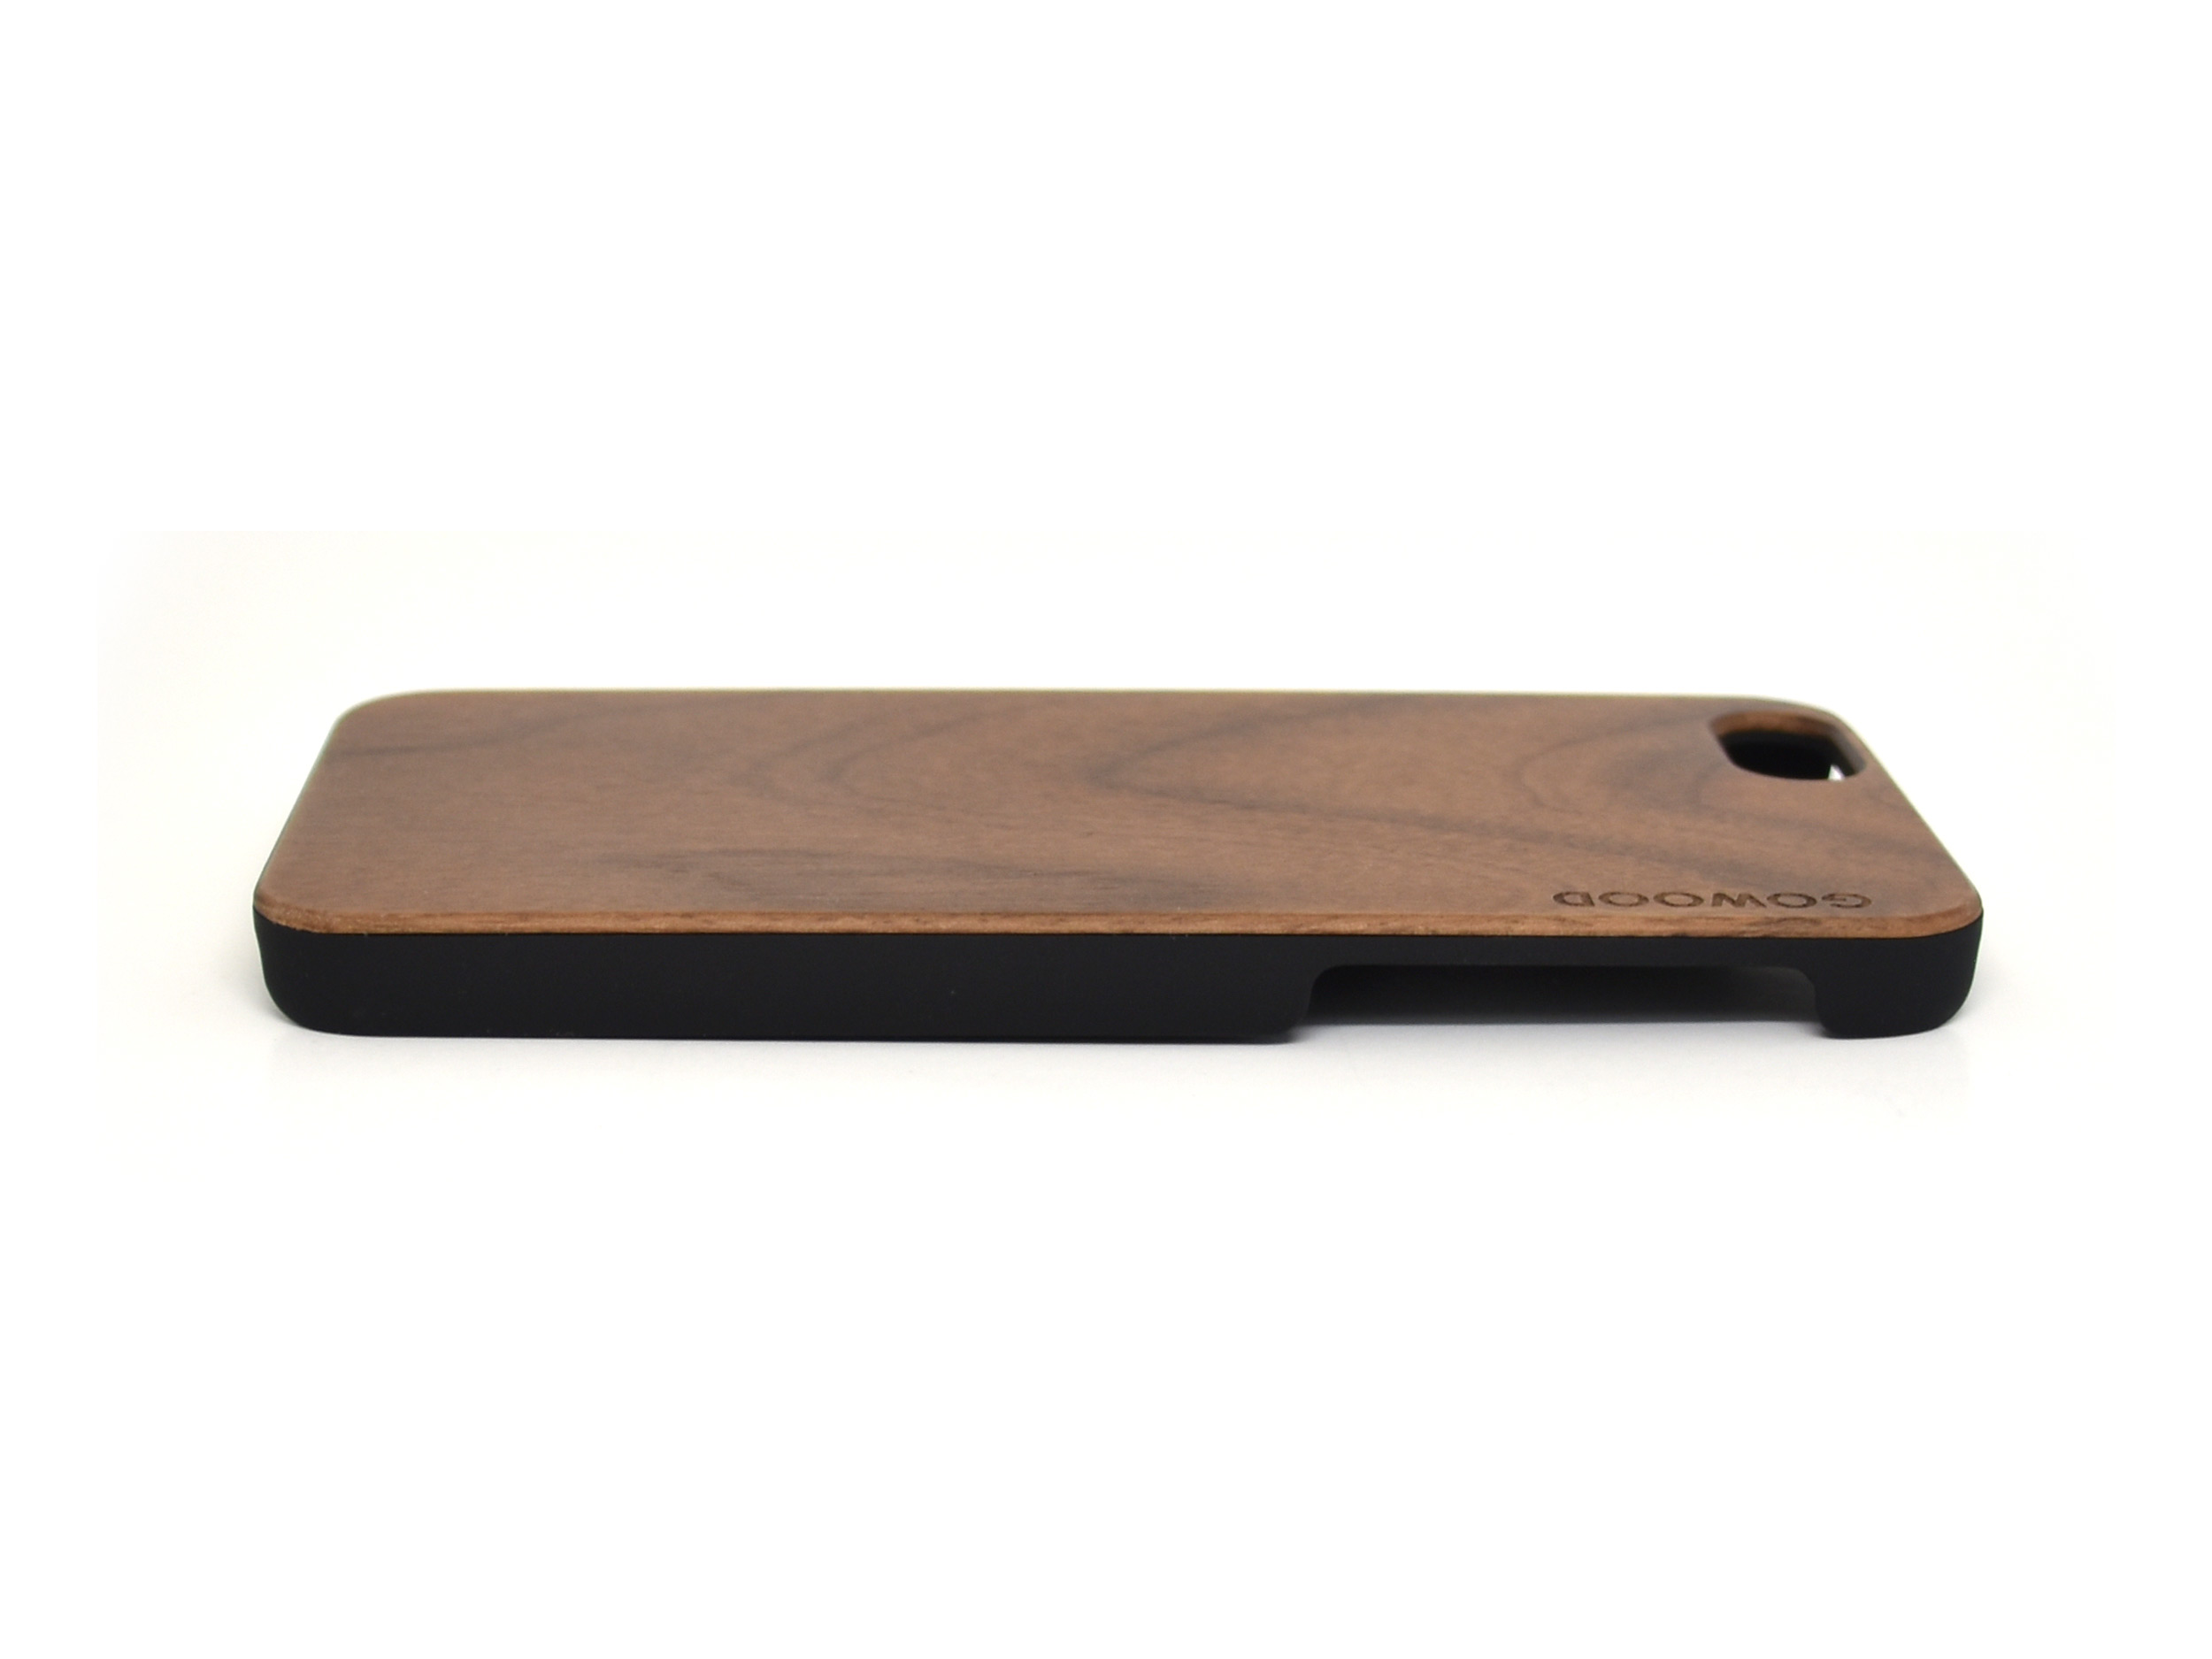 iPhone 6 case walnut wood right side